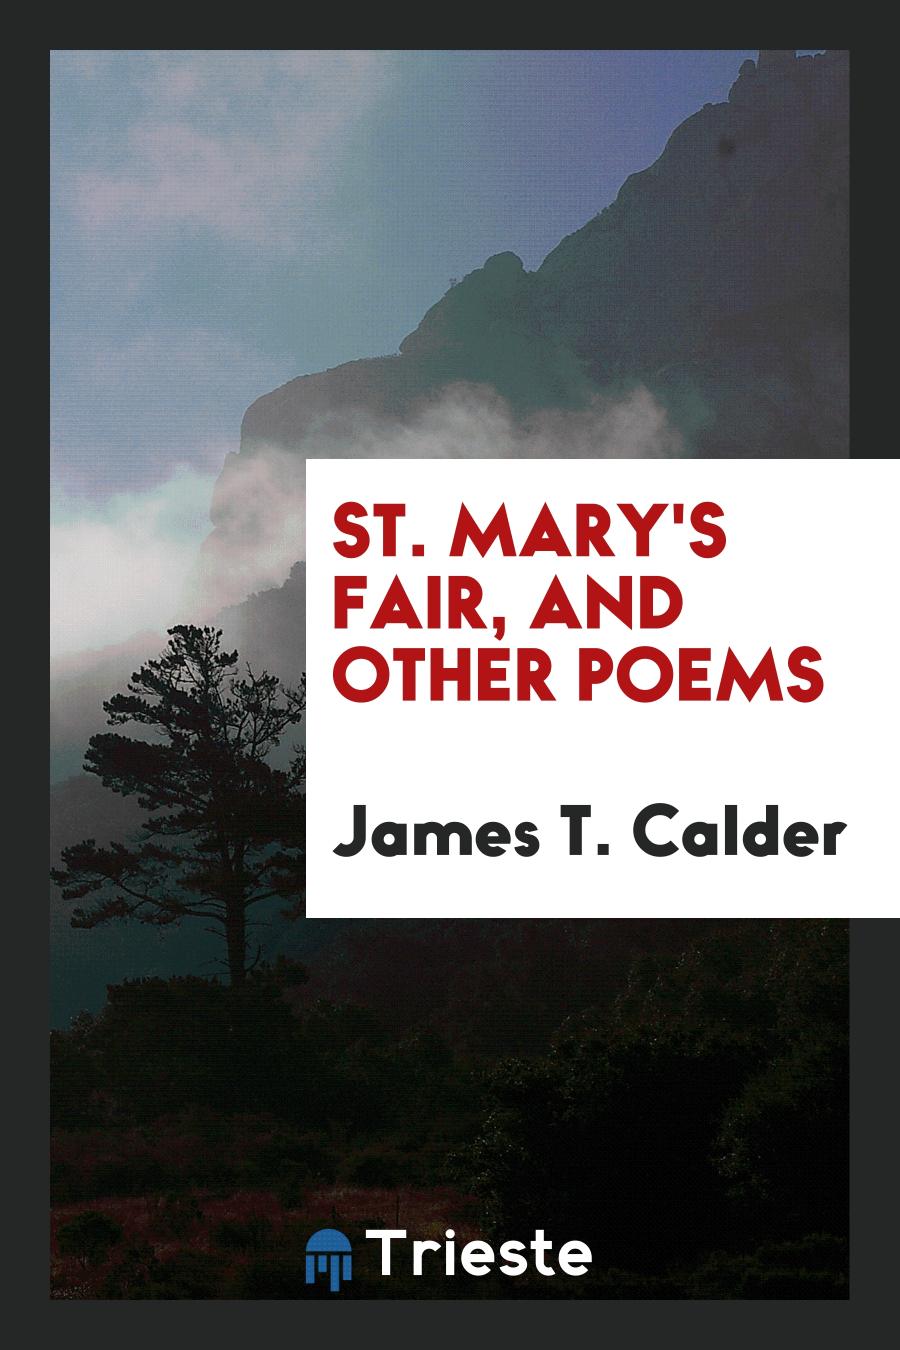 St. Mary's fair, and other poems